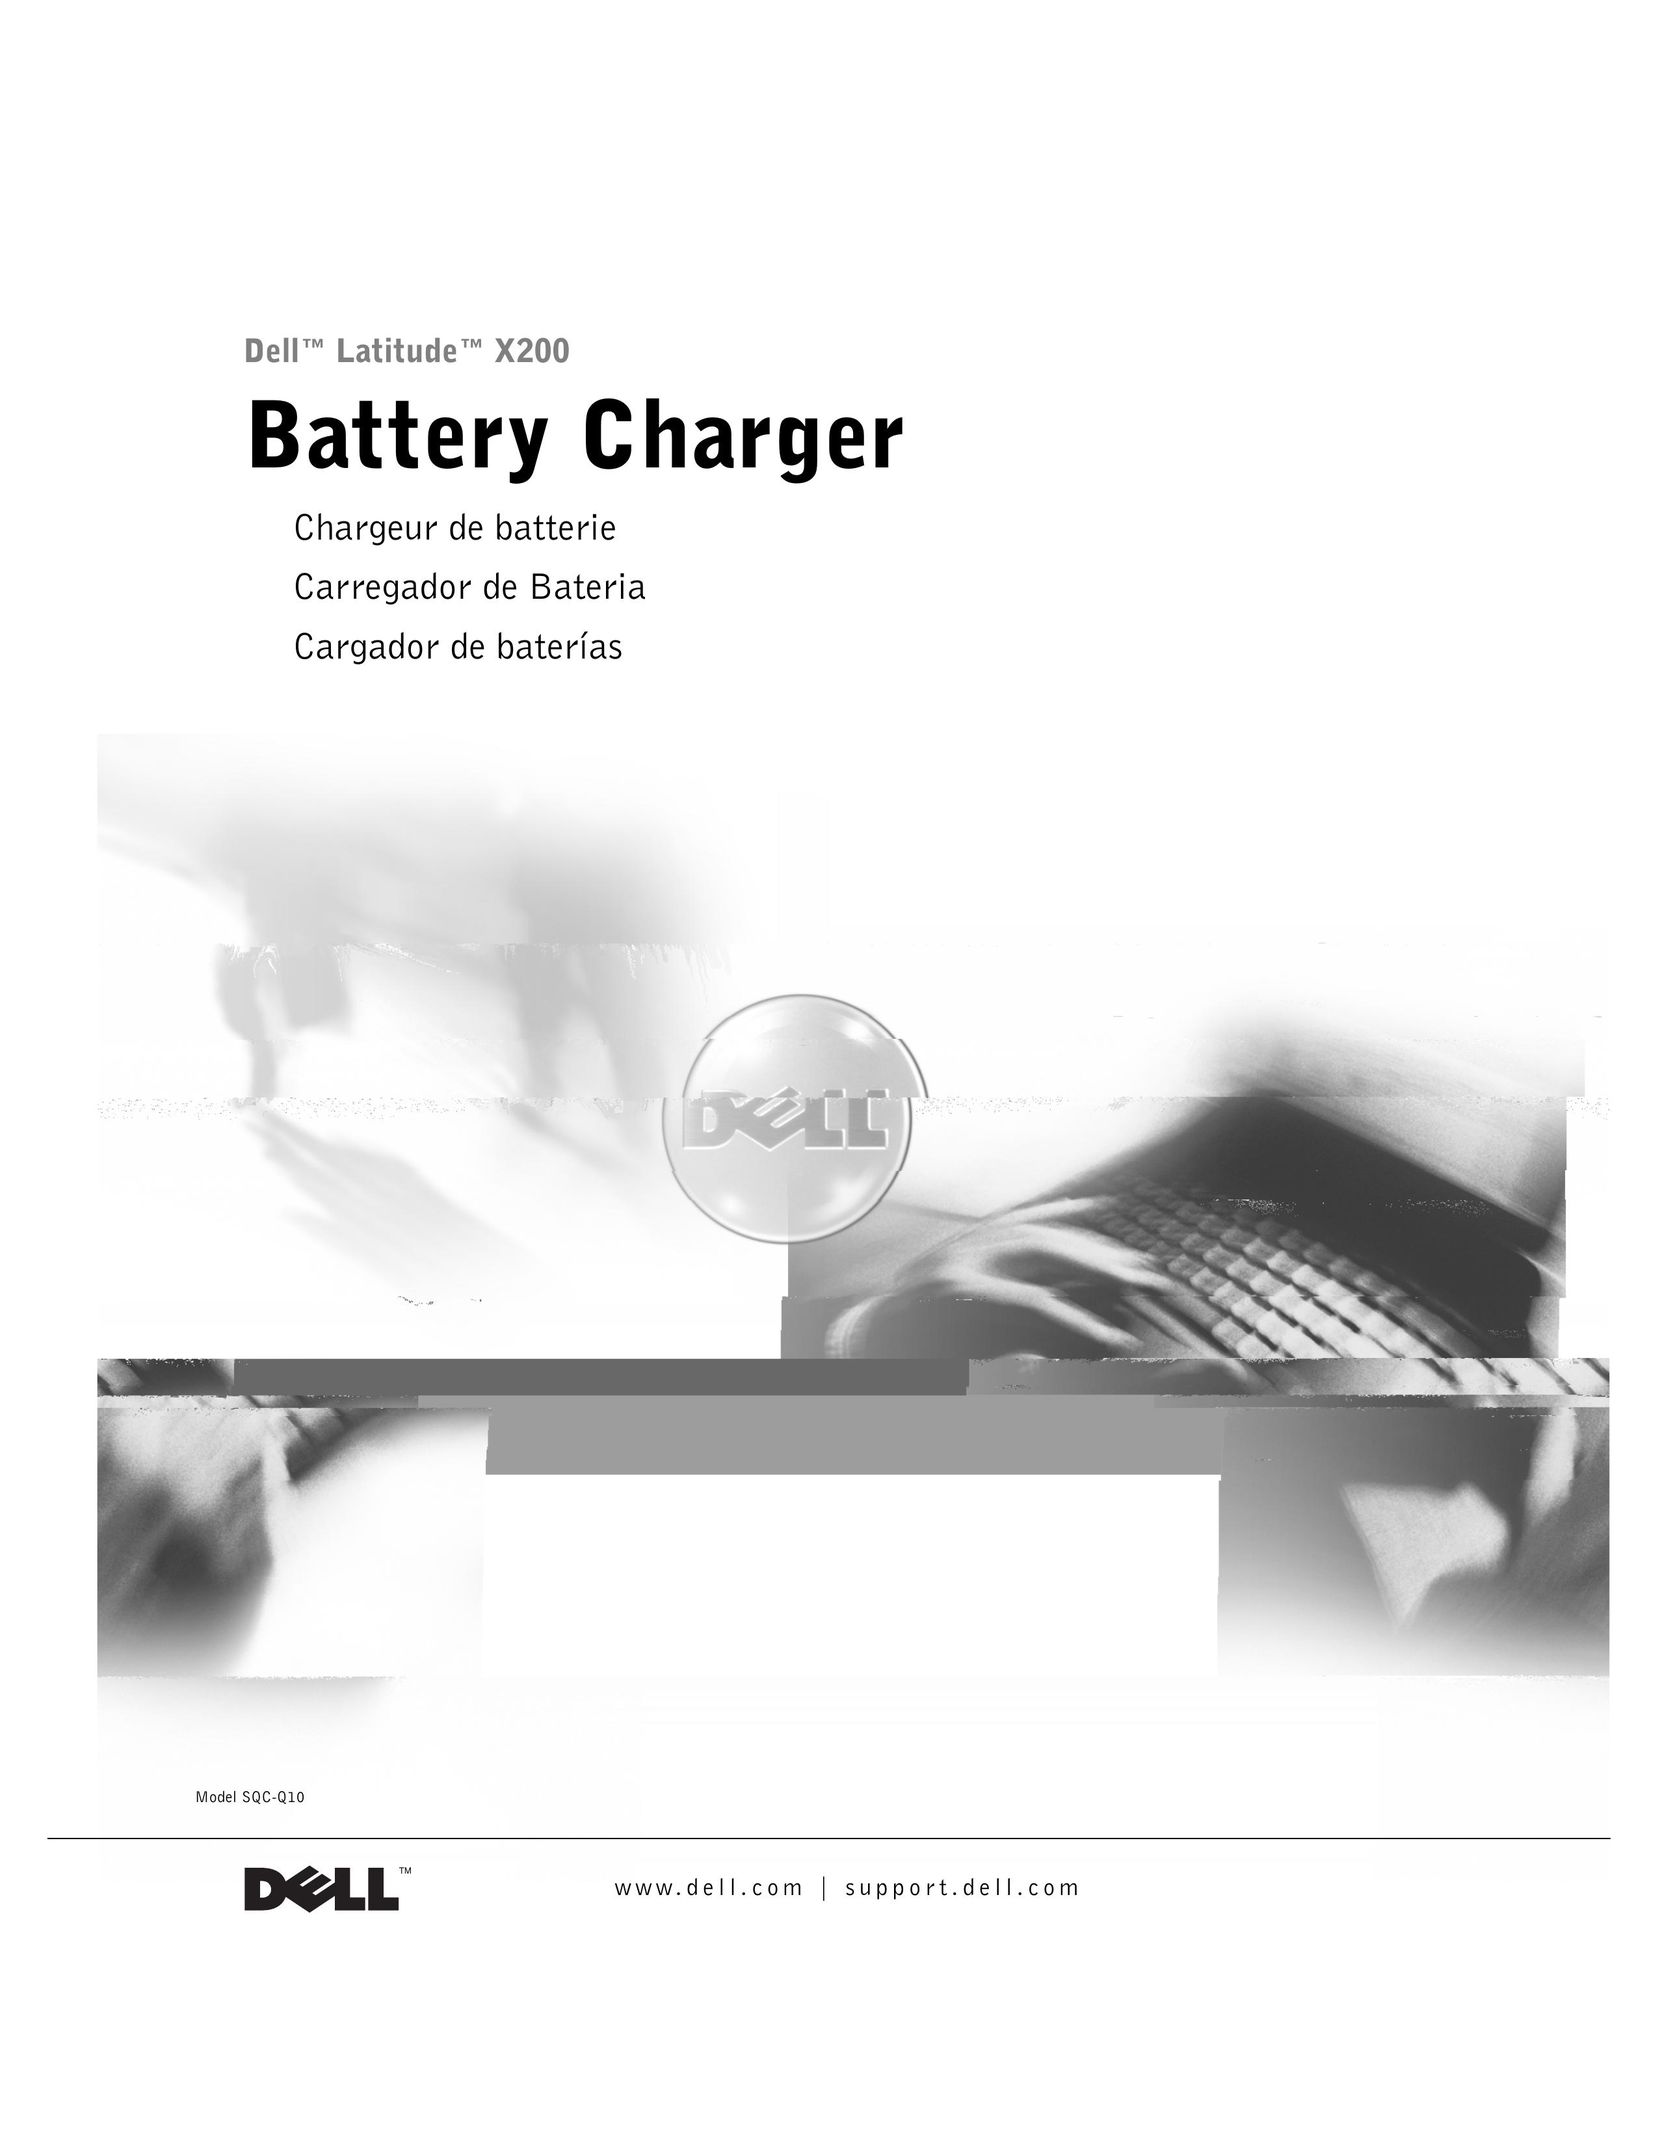 Dell X200 Battery Charger User Manual